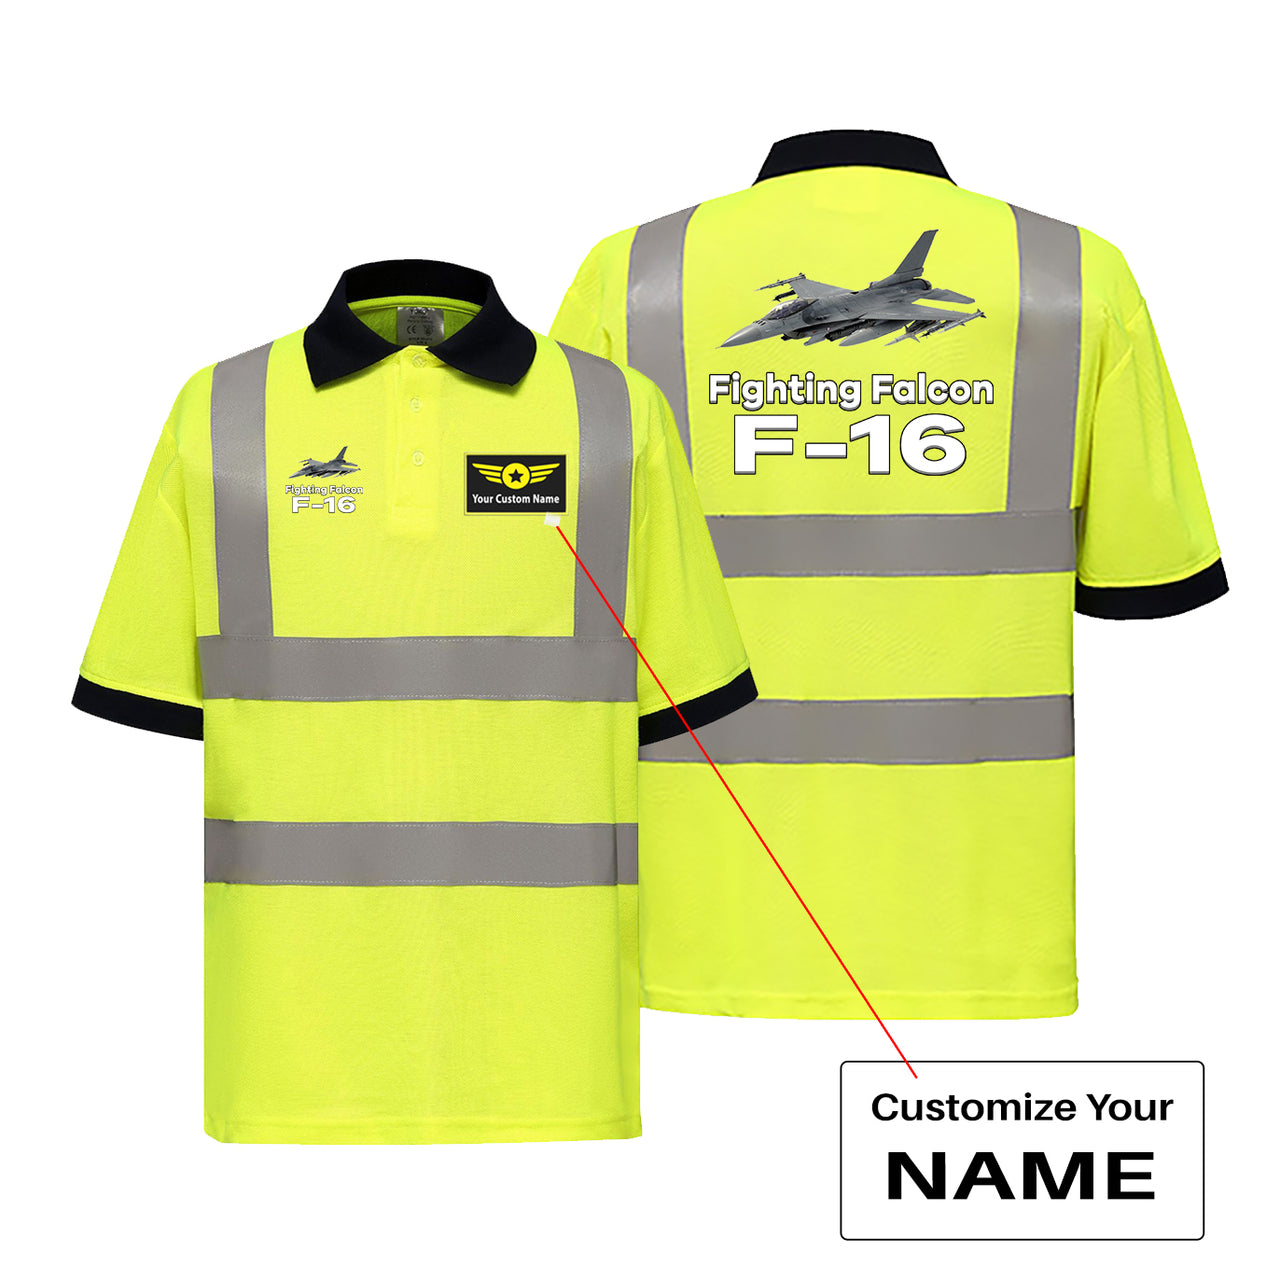 The Fighting Falcon F16 Designed Reflective Polo T-Shirts